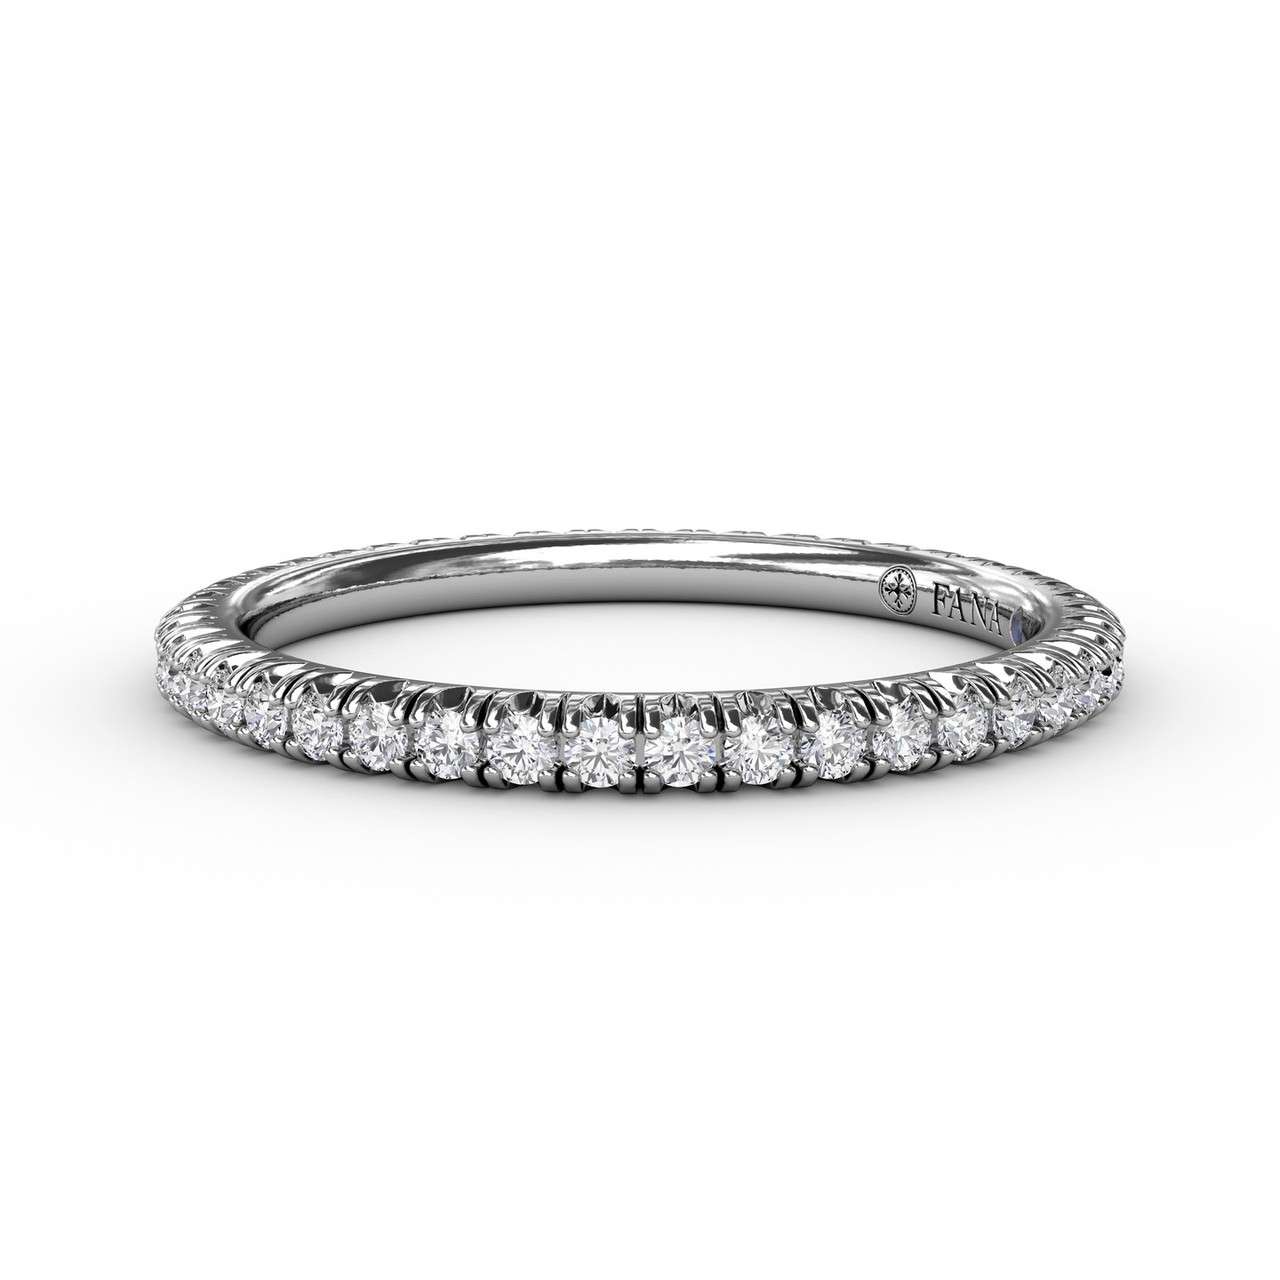 Delicate Modern Pave Eternity Band